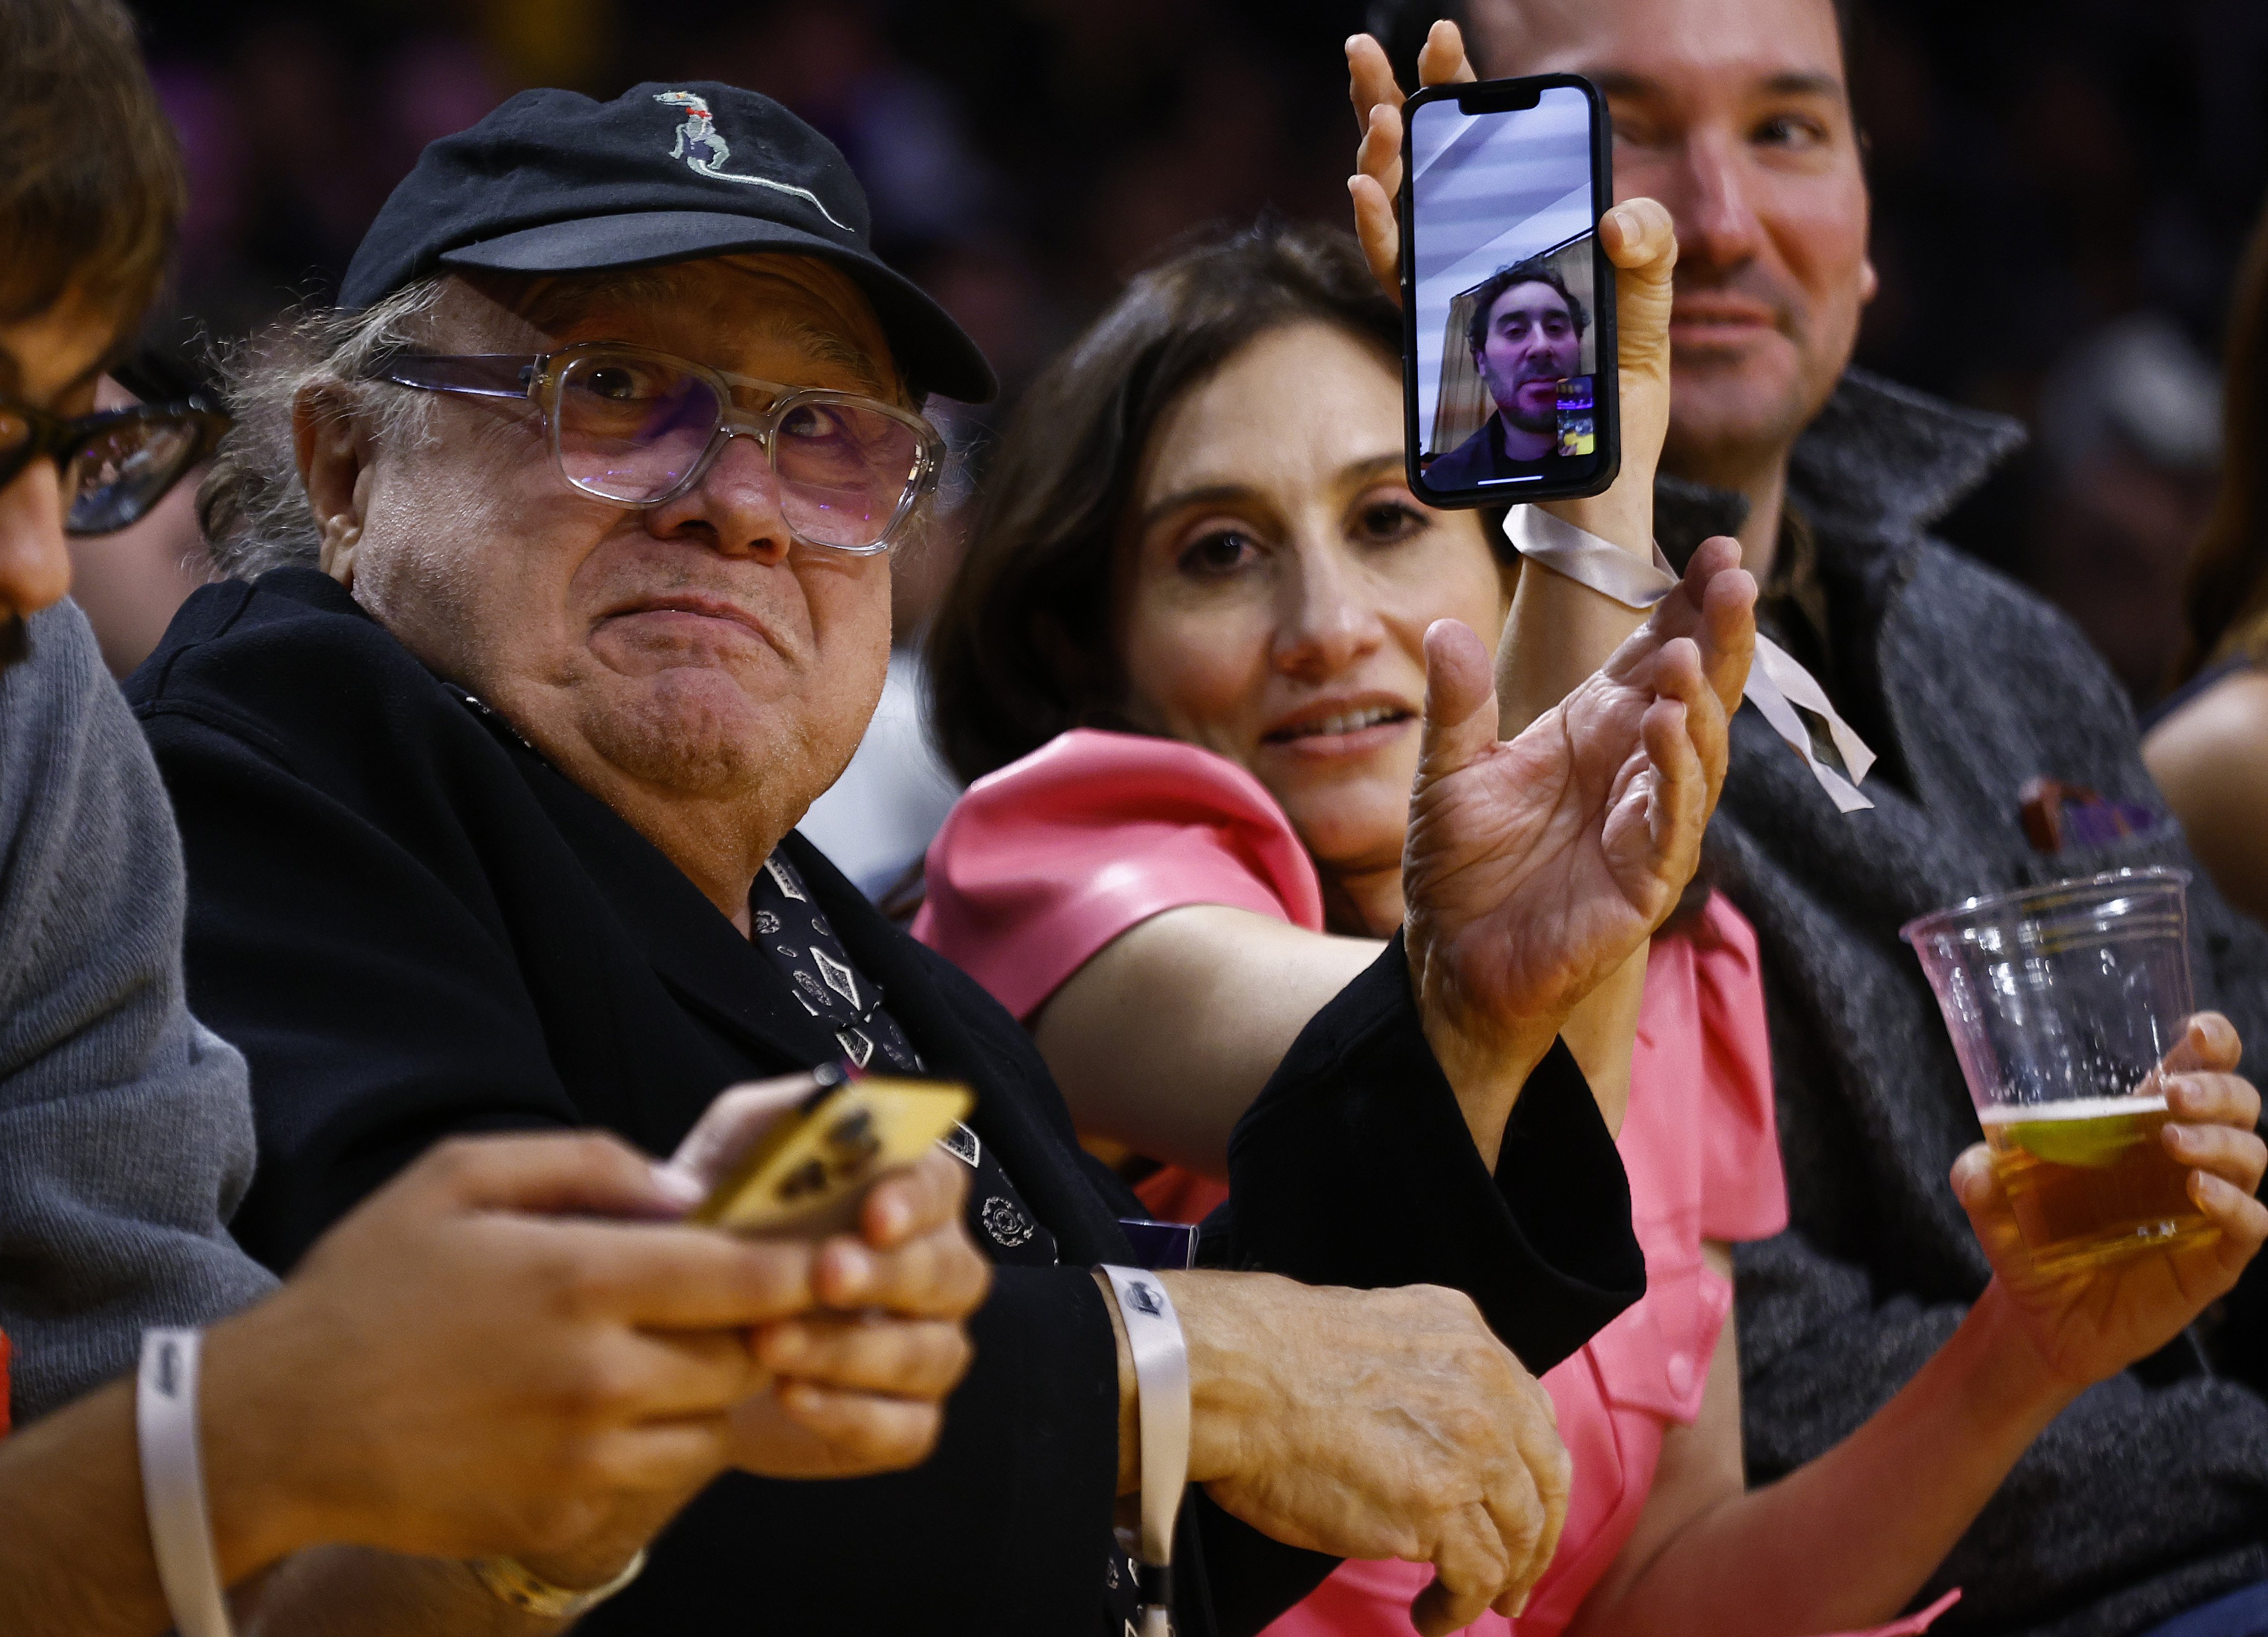 Danny DeVito video calling Jake DeVito at a basketball match between Sacramento Kings and the Los Angeles Lakers at Crypto.com Arena in Los Angeles, California, on January 18, 2023. | Source: Getty Images